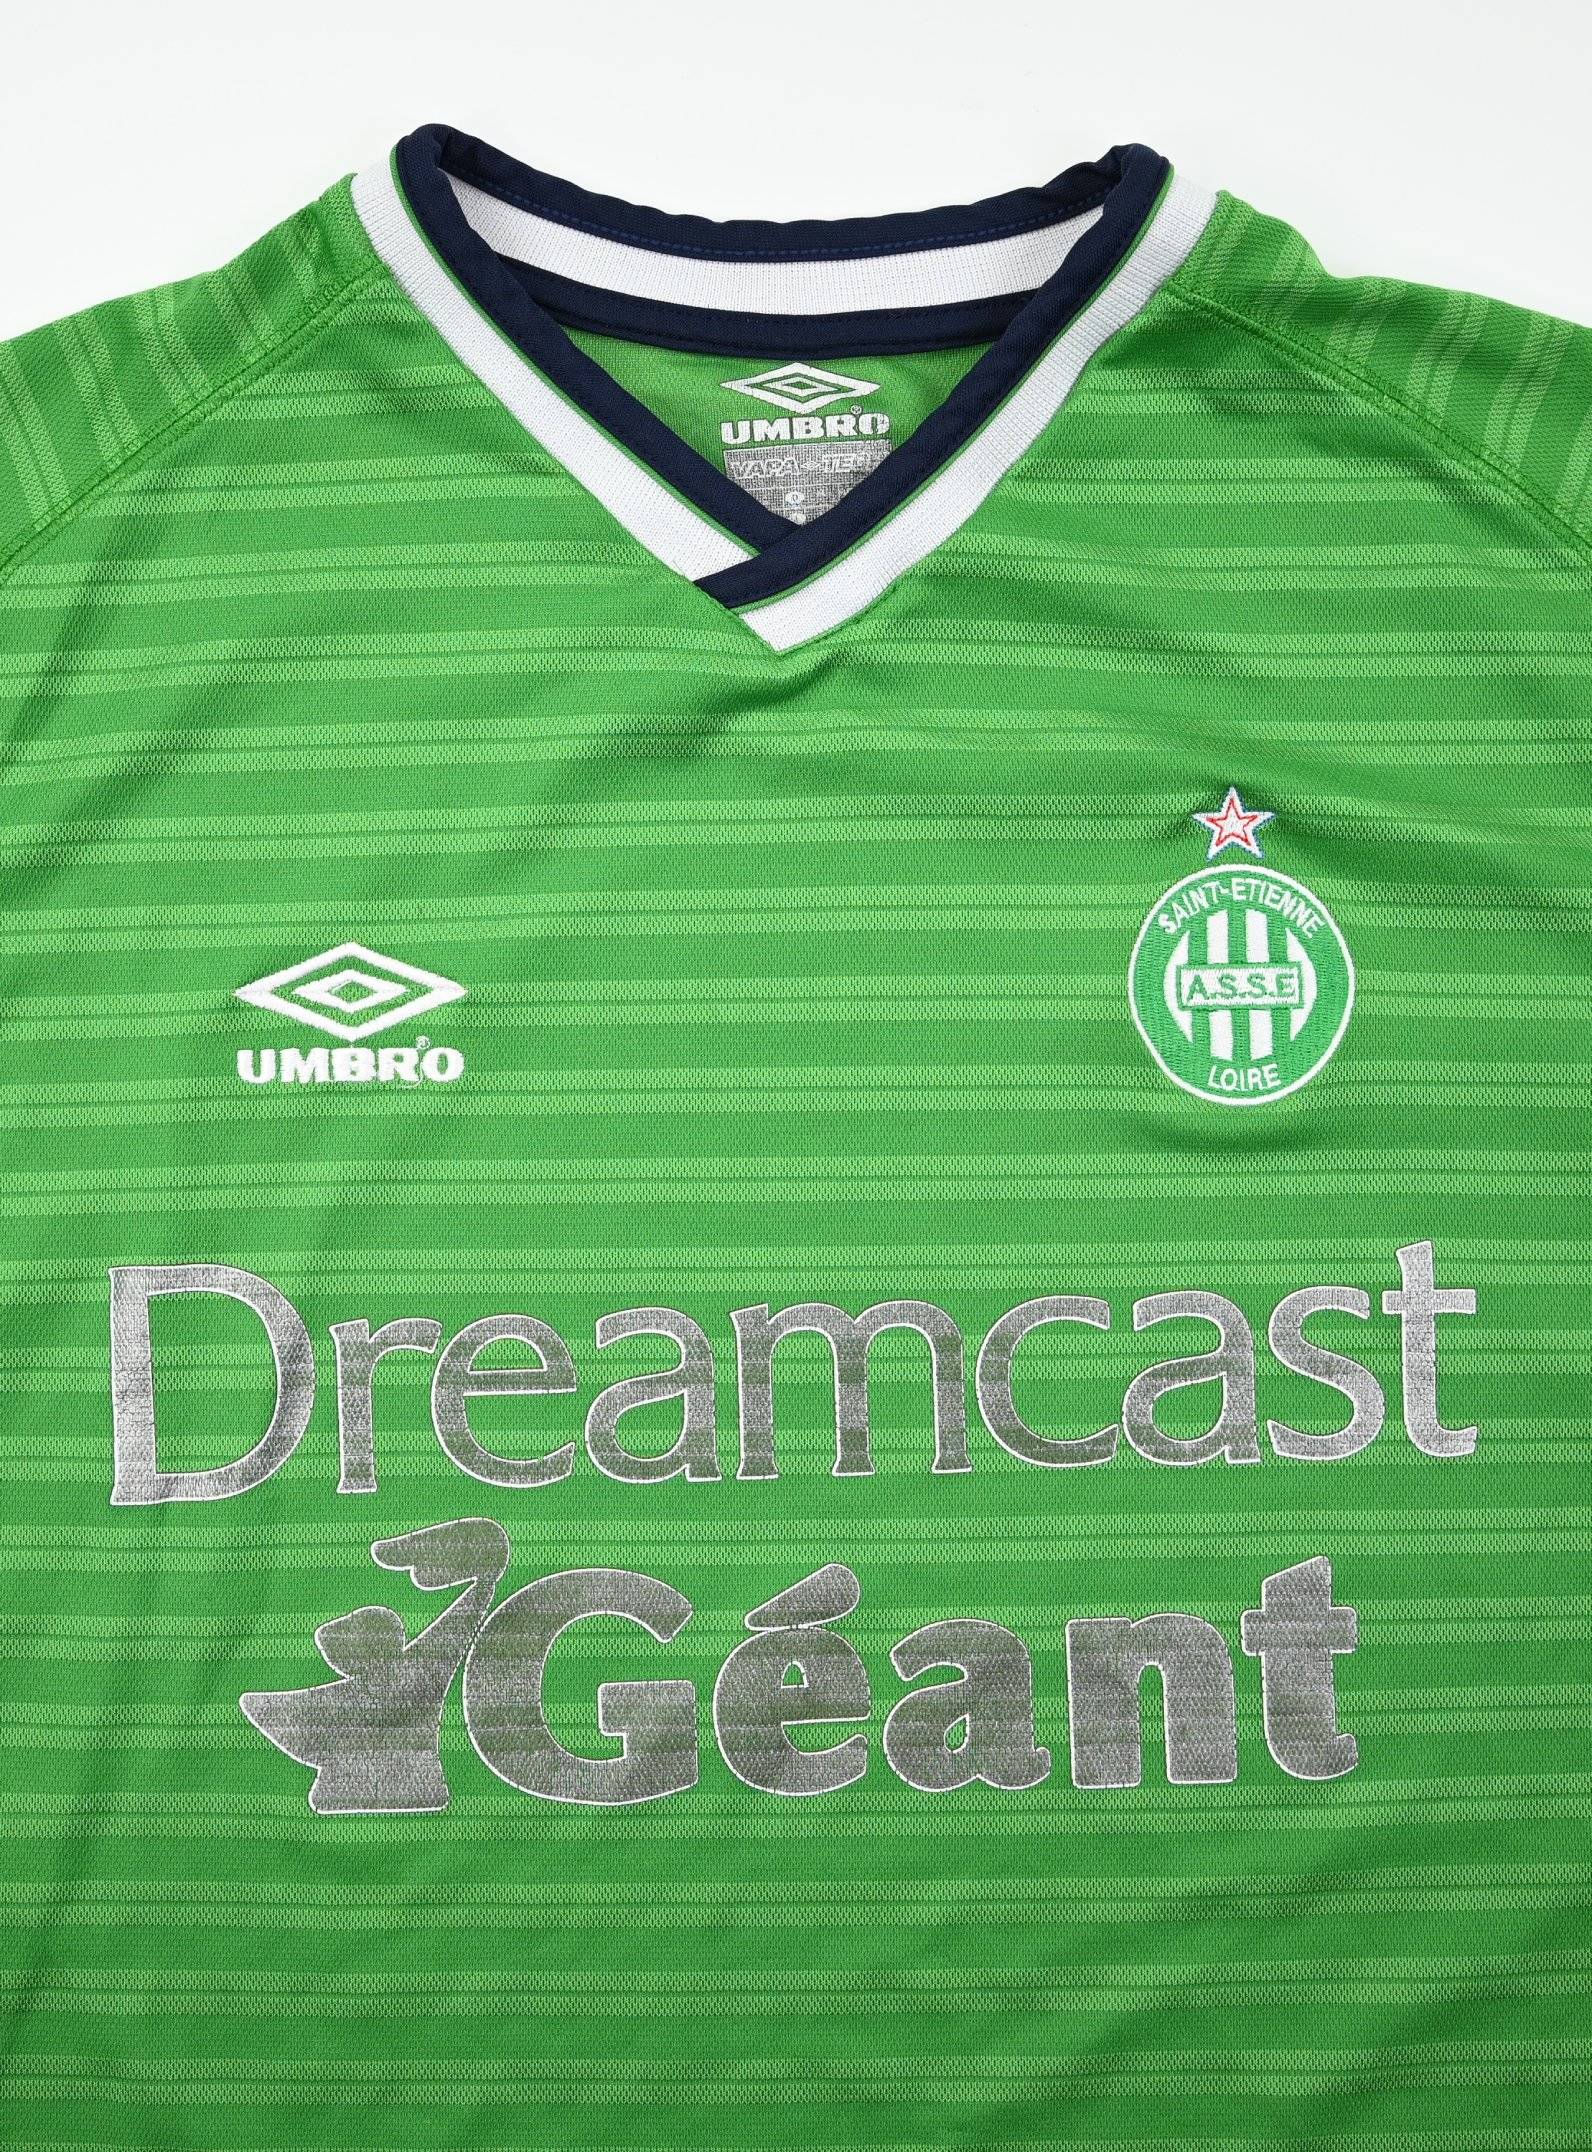 Maillot vintage 1999 / 2000 - AS Saint-Etienne (XL) - Back To The Football